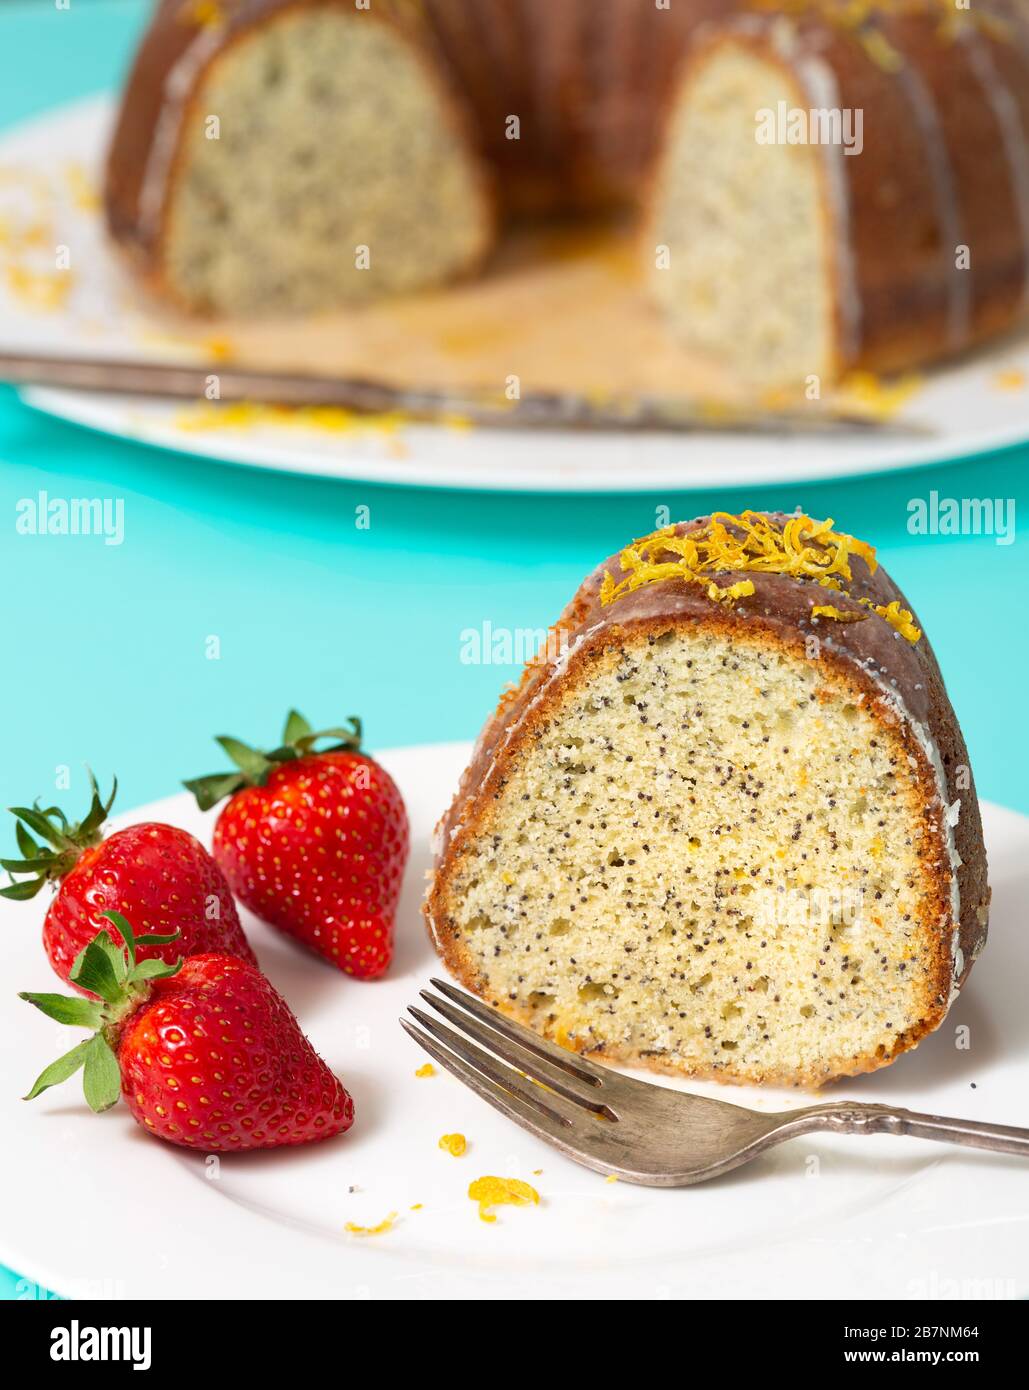 Close-up view of a slice of lemon poppyseed cake served with fresh ripe strawberries Stock Photo